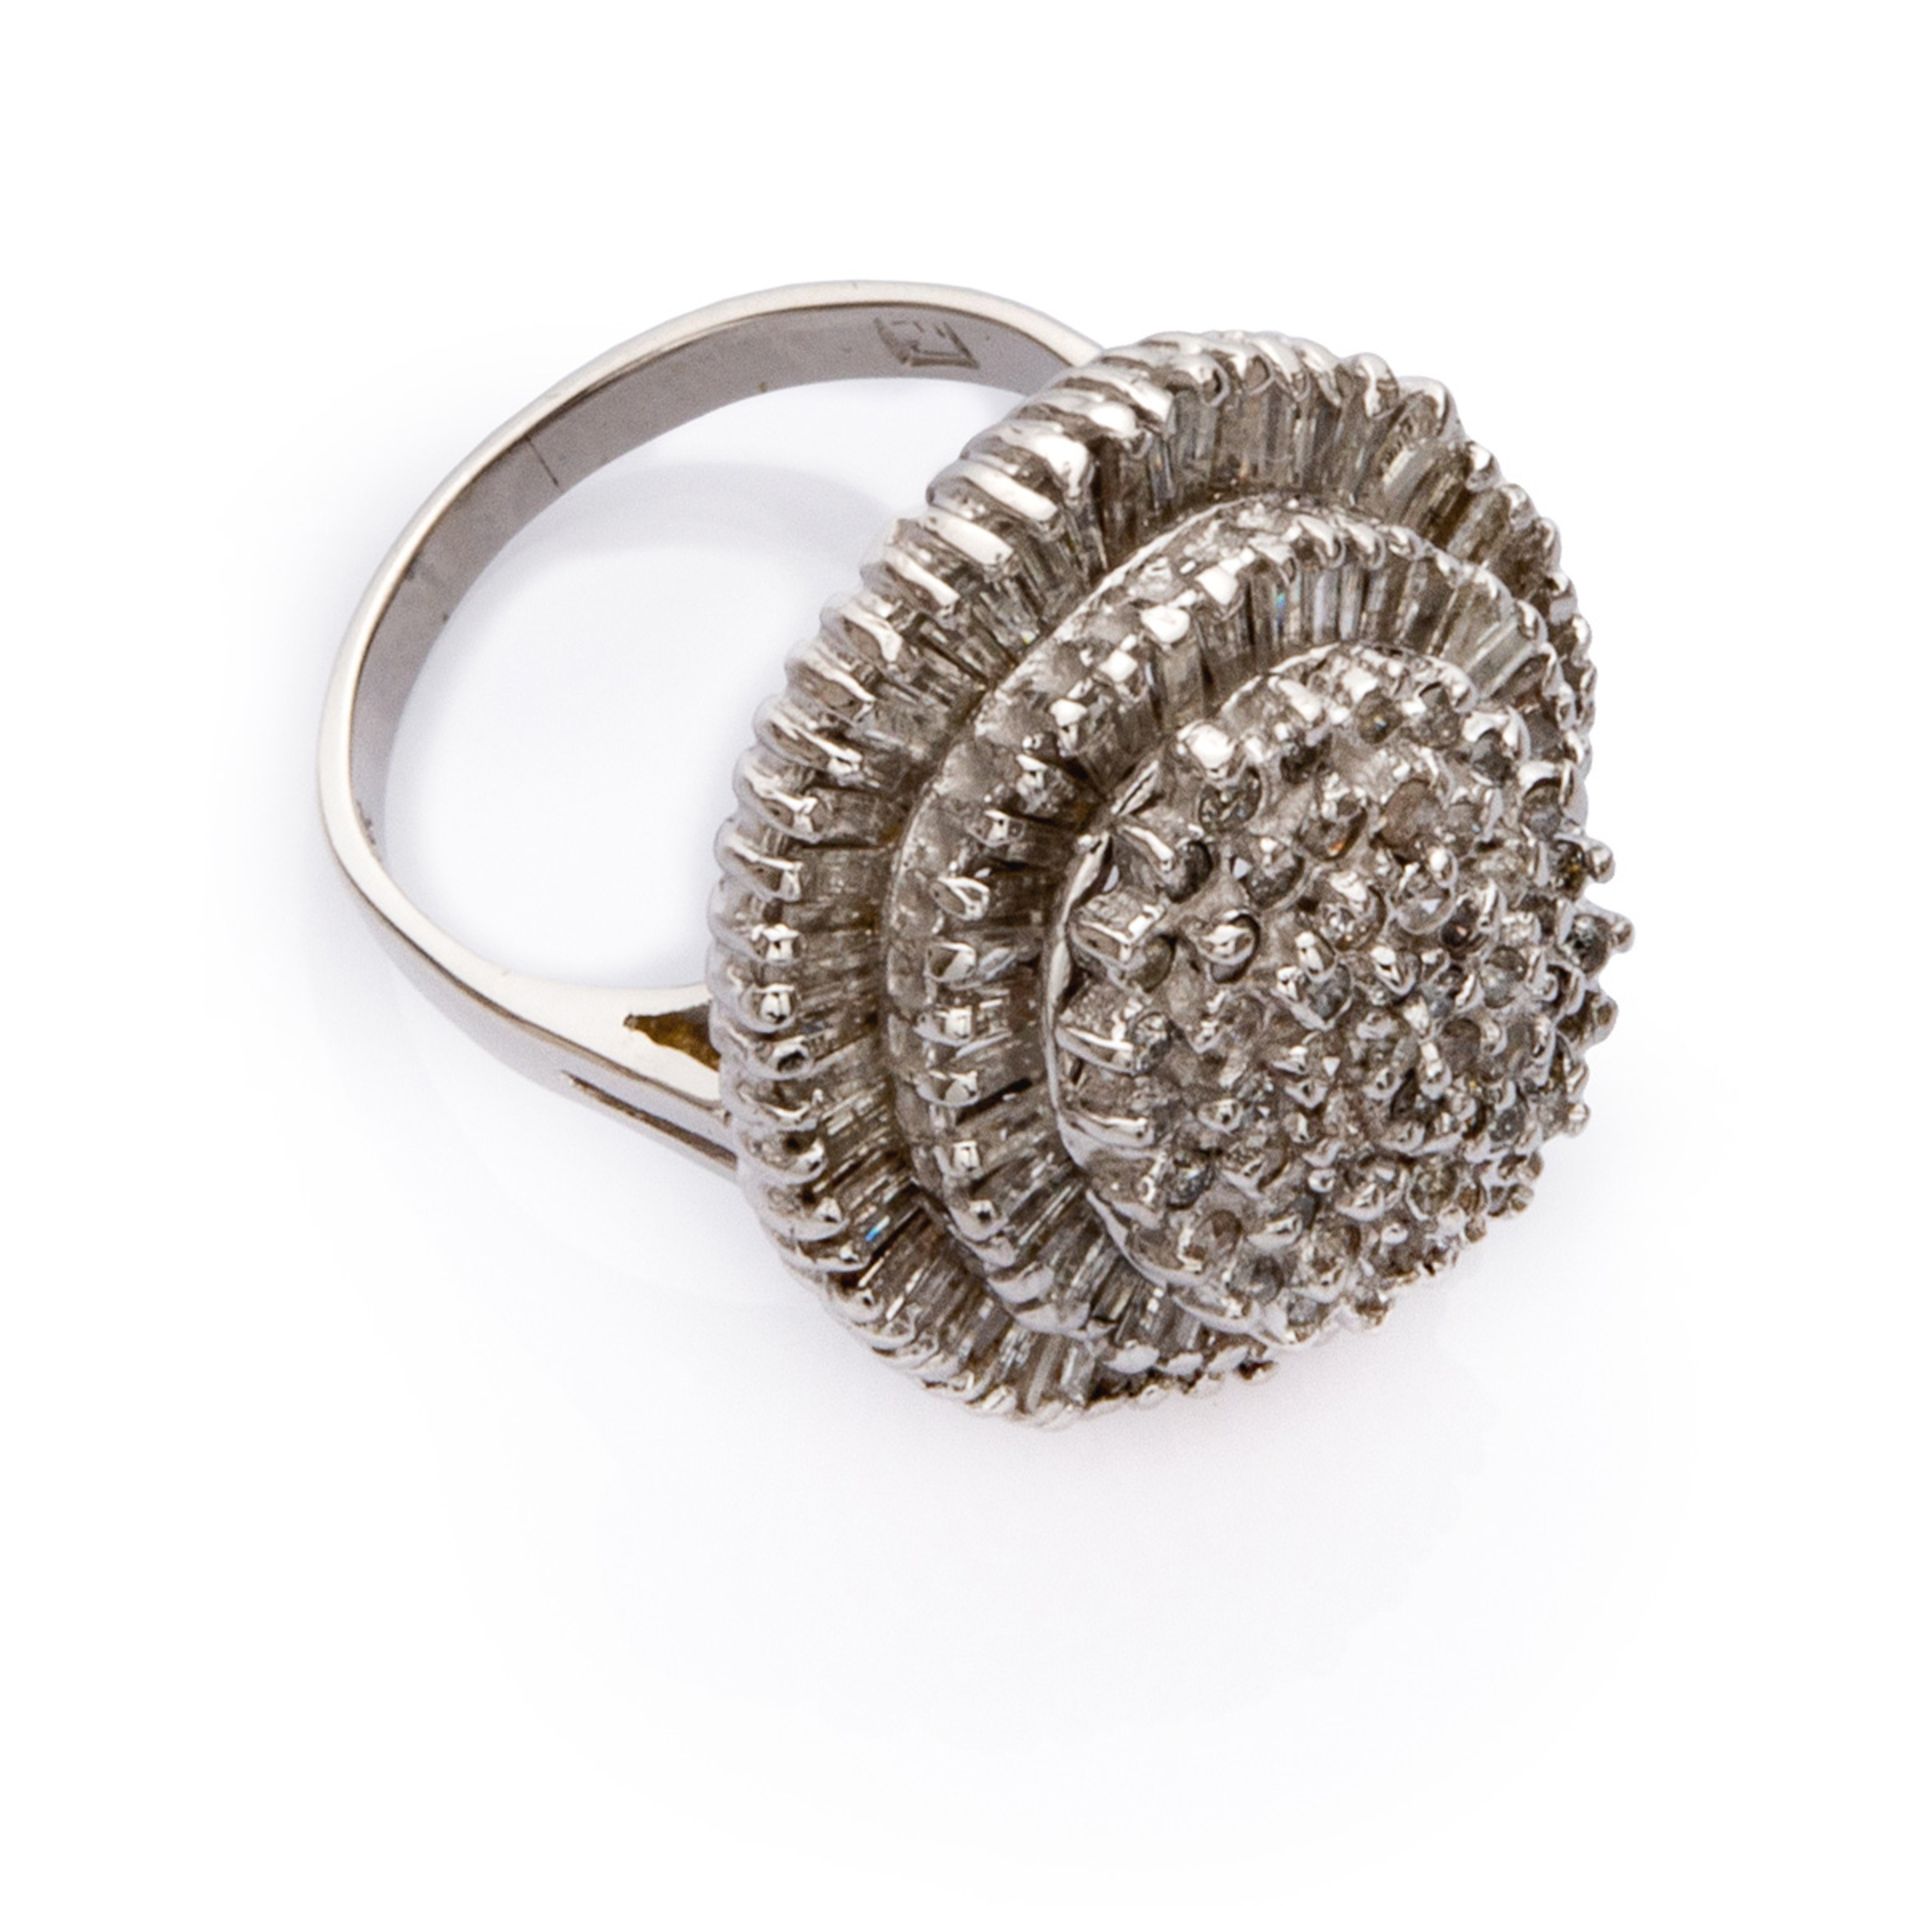 RING in white gold 18 kts., embellished with round cut and baguette cut diamonds. Diamonds ct. 2.